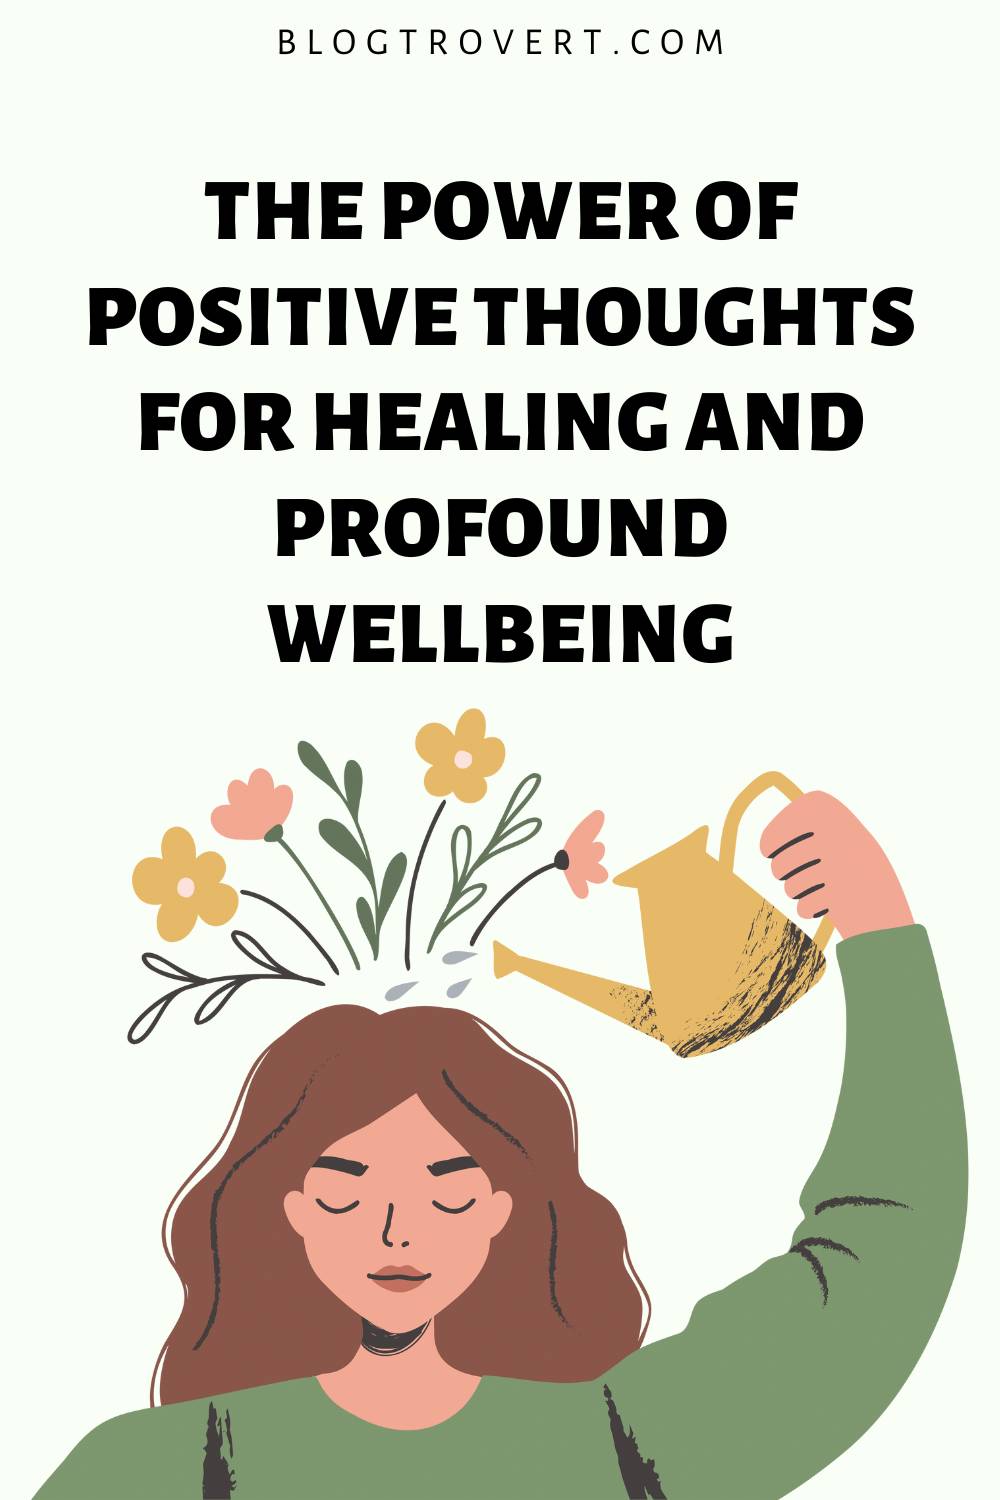 The power of positive thoughts for healing and profound wellbeing 2